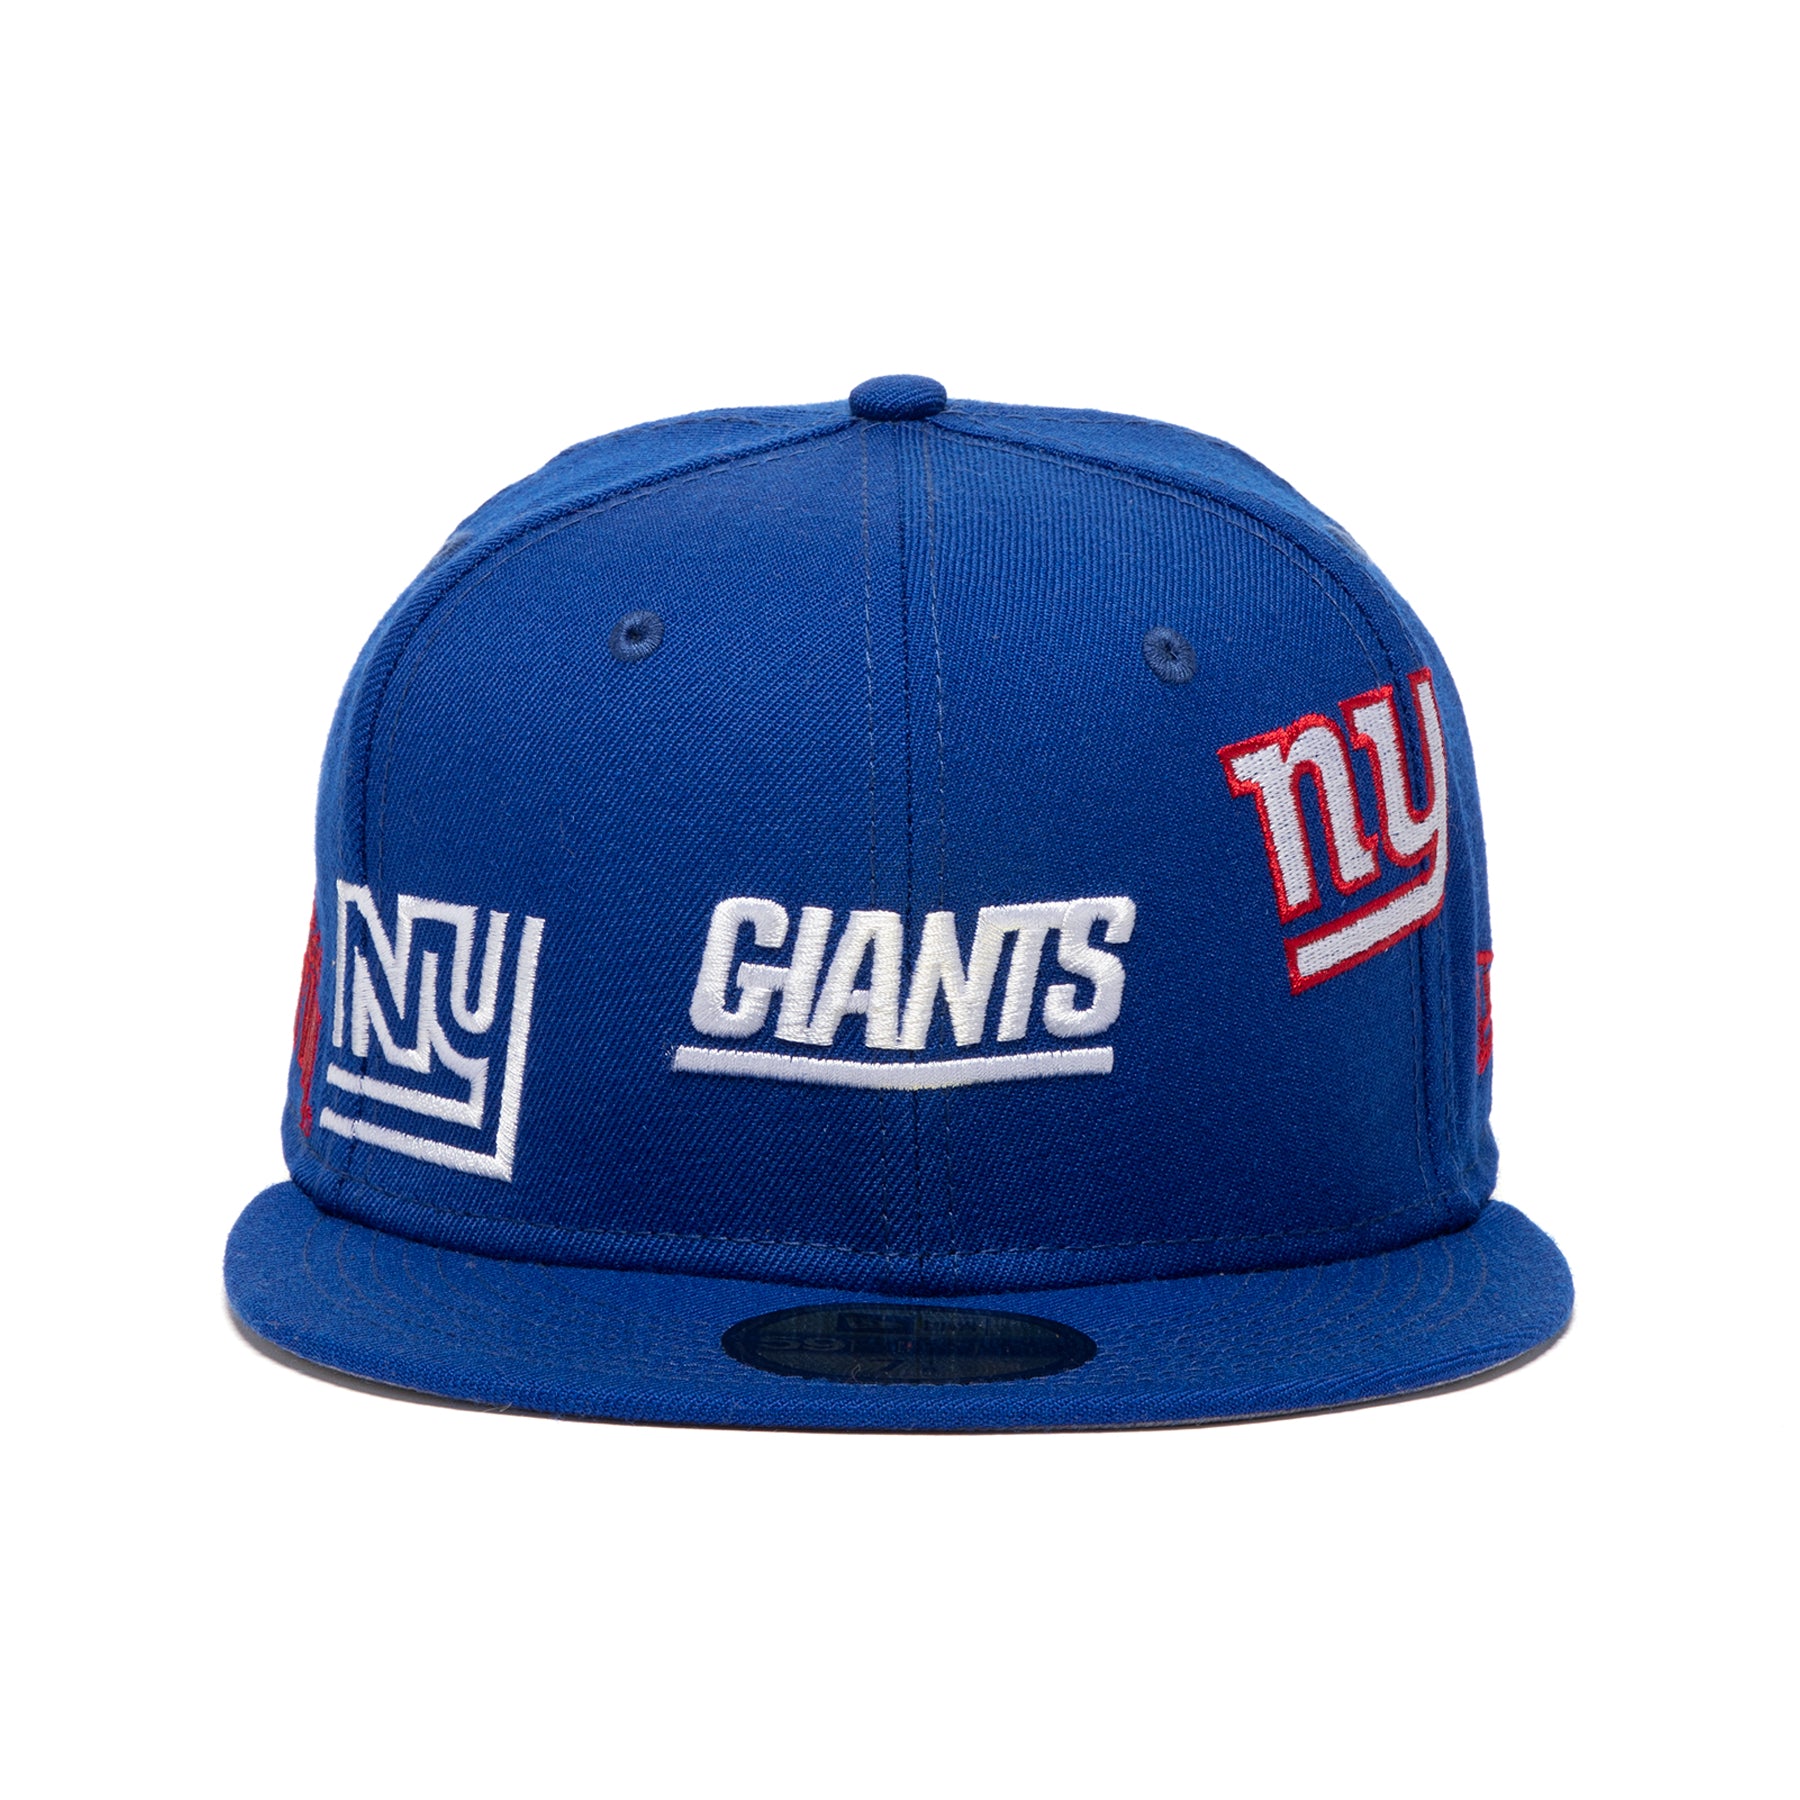 New York Giants Hat New Era 59Fifty Blue Red Fitted Cap Size 7-1/8 1/4  Football